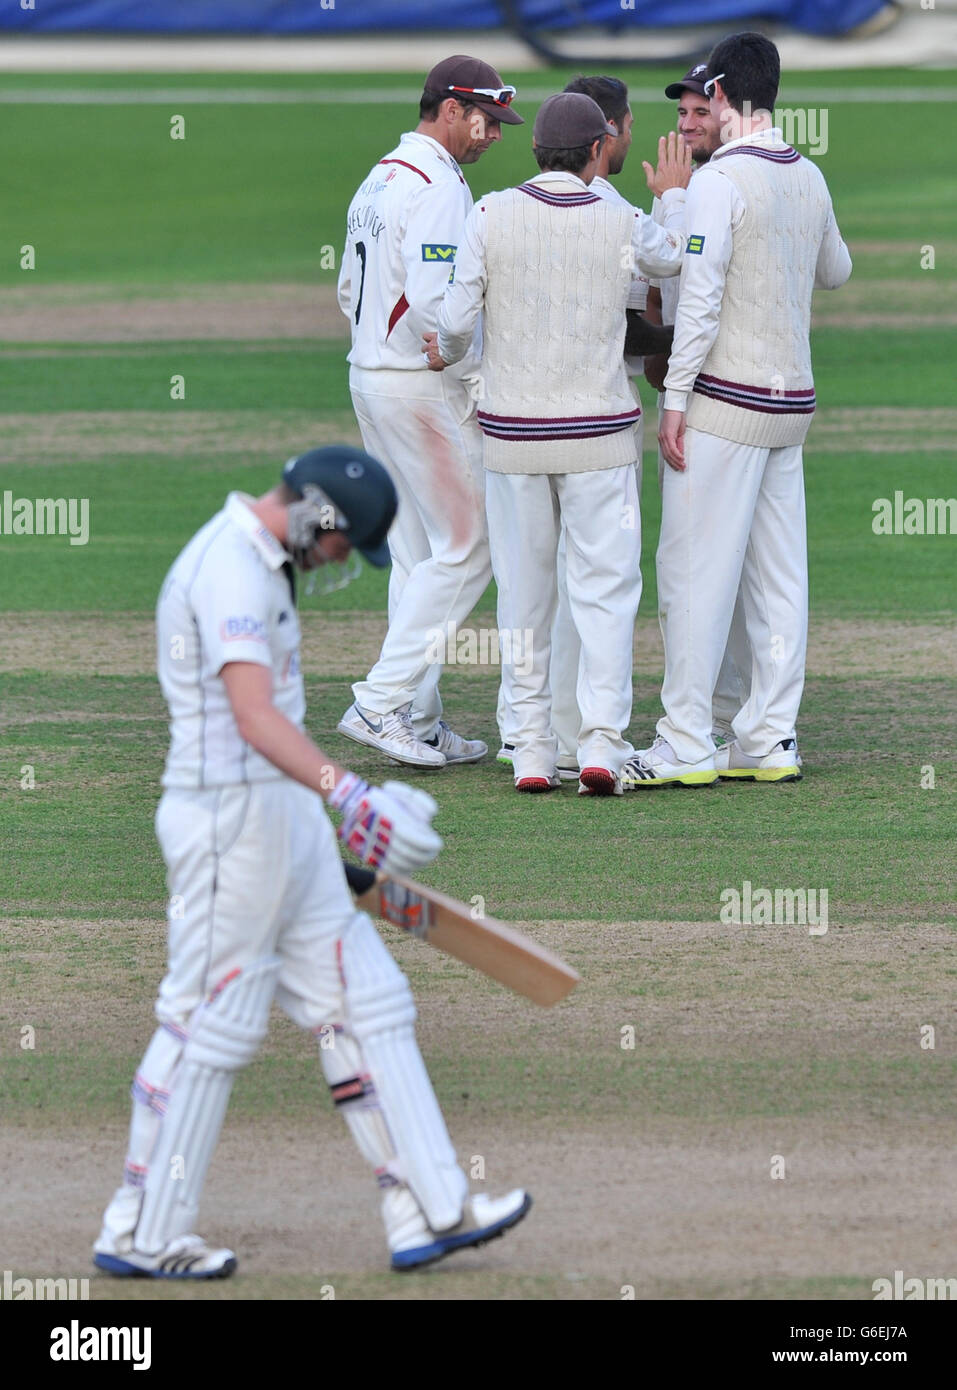 Somerset's Peter Trego (obscured) celebrates taking the wicket of Nottinghamshire's Rikki Wessels during the LV= County Championship, Division One match at Trent Bridge, Nottingham. Stock Photo